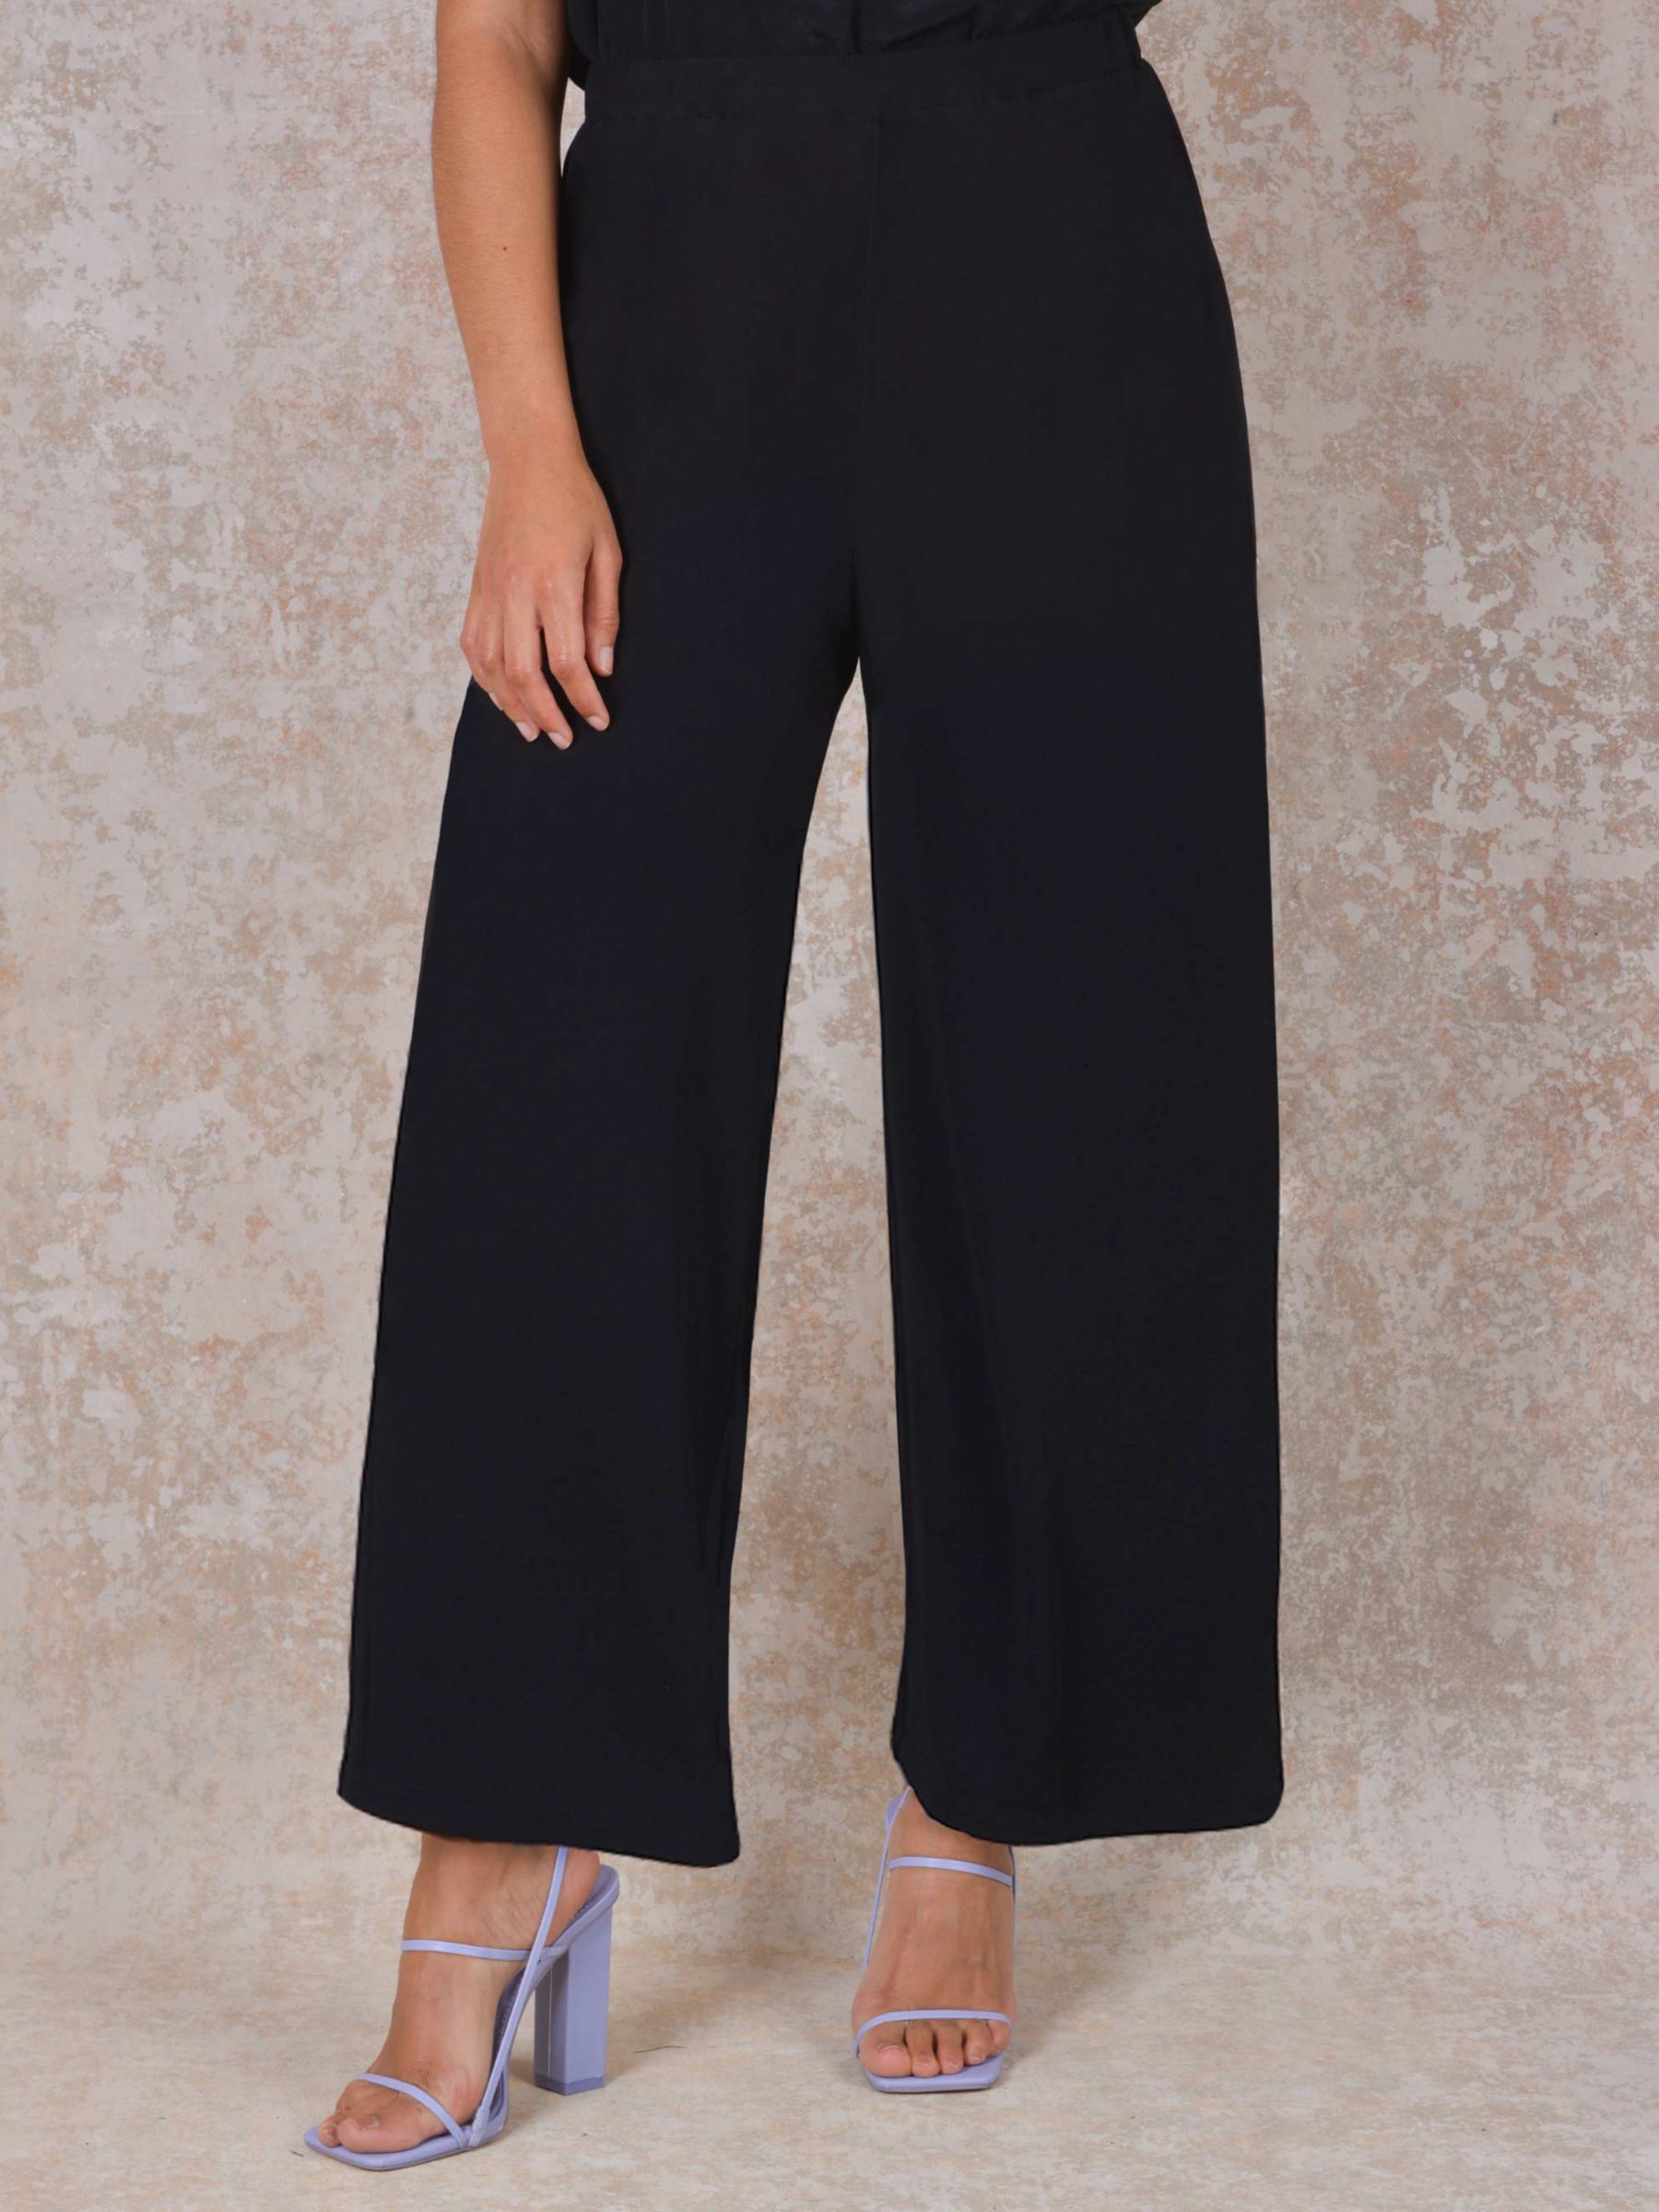 Live Unlimited French Crepe Palazzo Trousers, Black at John Lewis ...